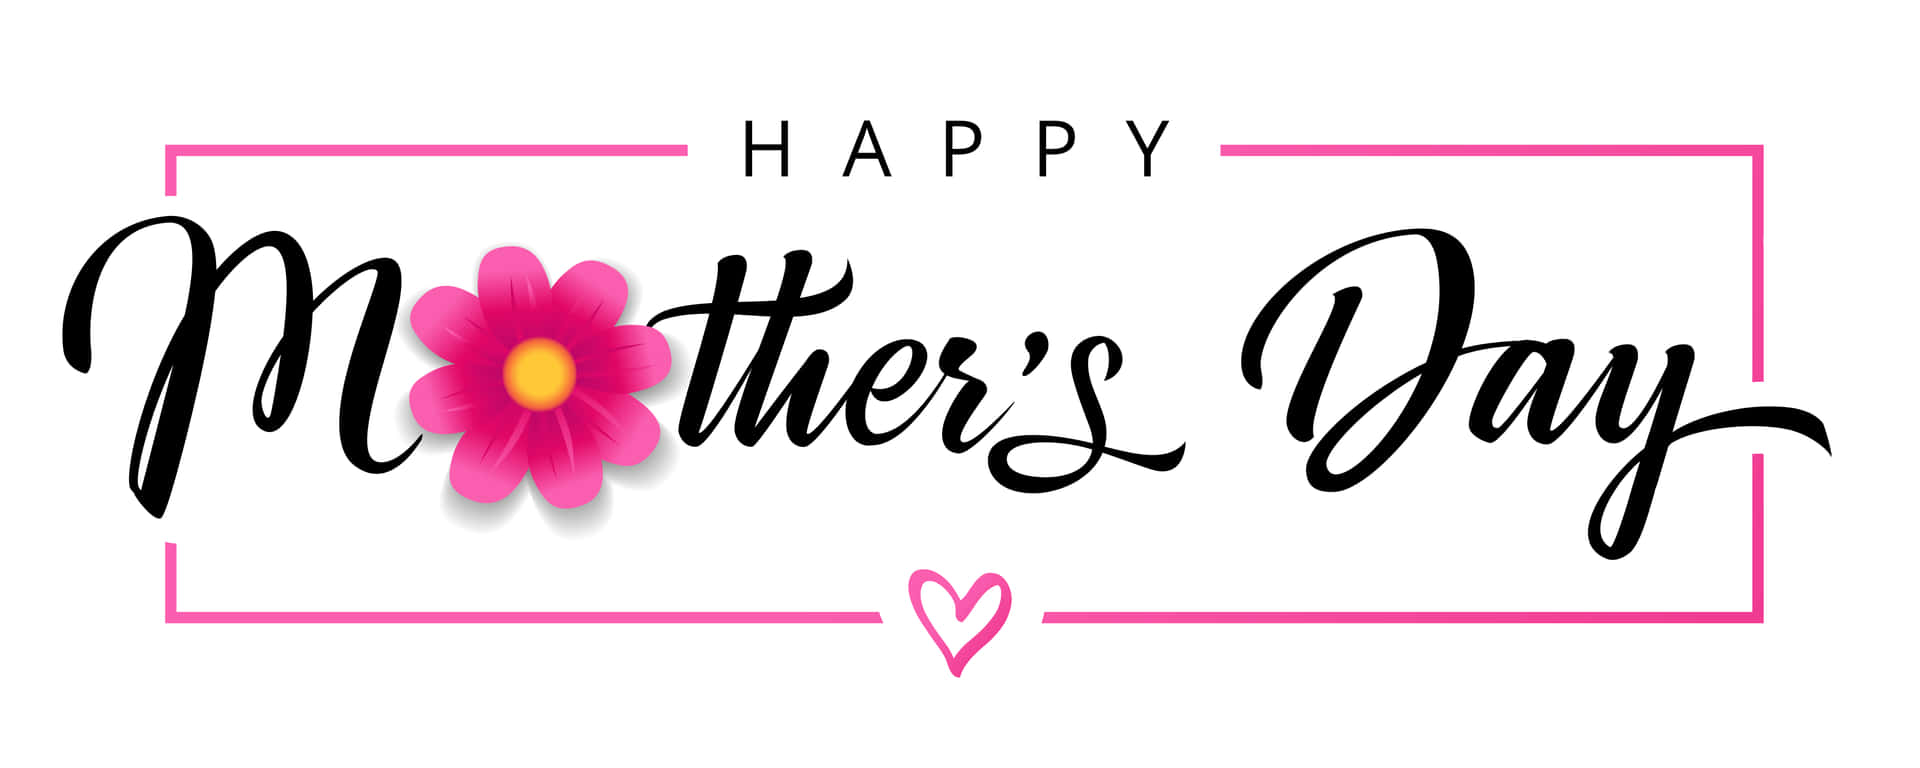 Happy Mothers Day! Celebrate The Special Women In Your Life With Love And Appreciation.